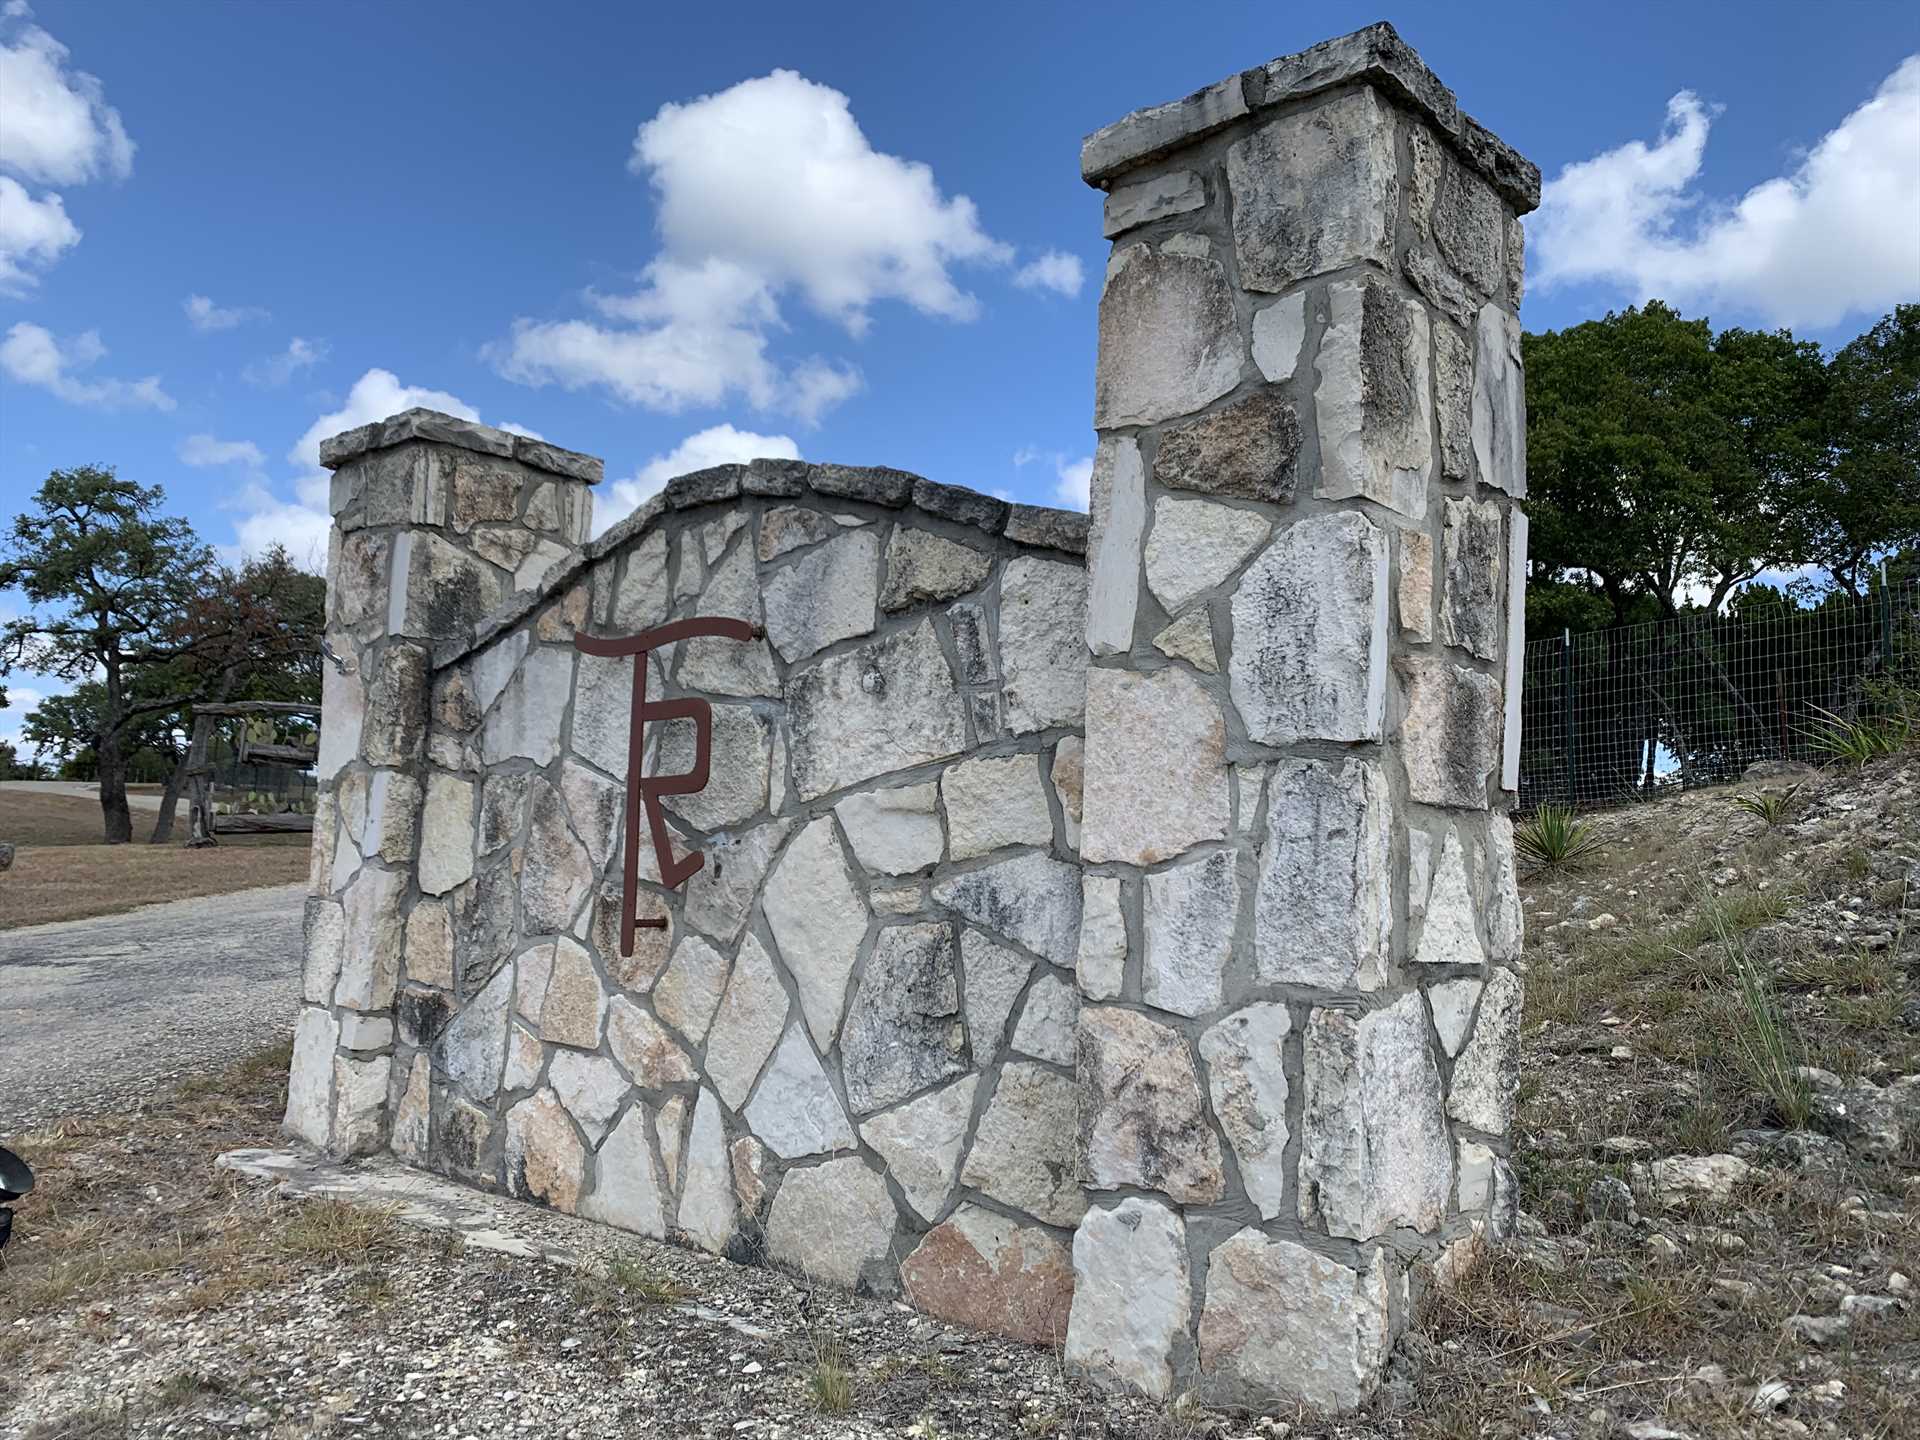                                                 The Tabasco Ranch gate stands out alongside the road, and your visit here will stand out, too!